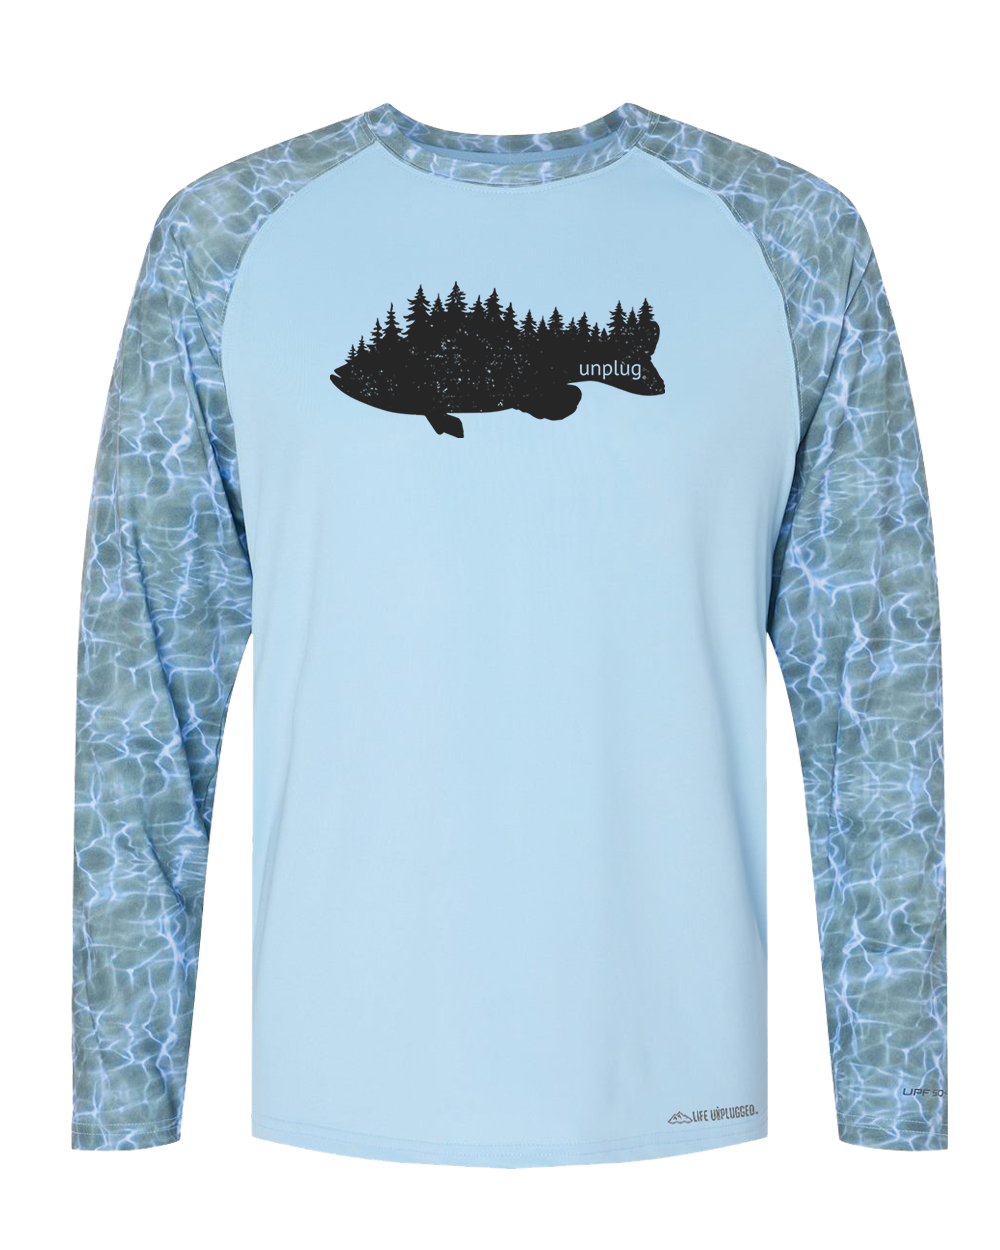 Bass In The Trees Poly/Spandex High Performance Long Sleeve with UPF 50+